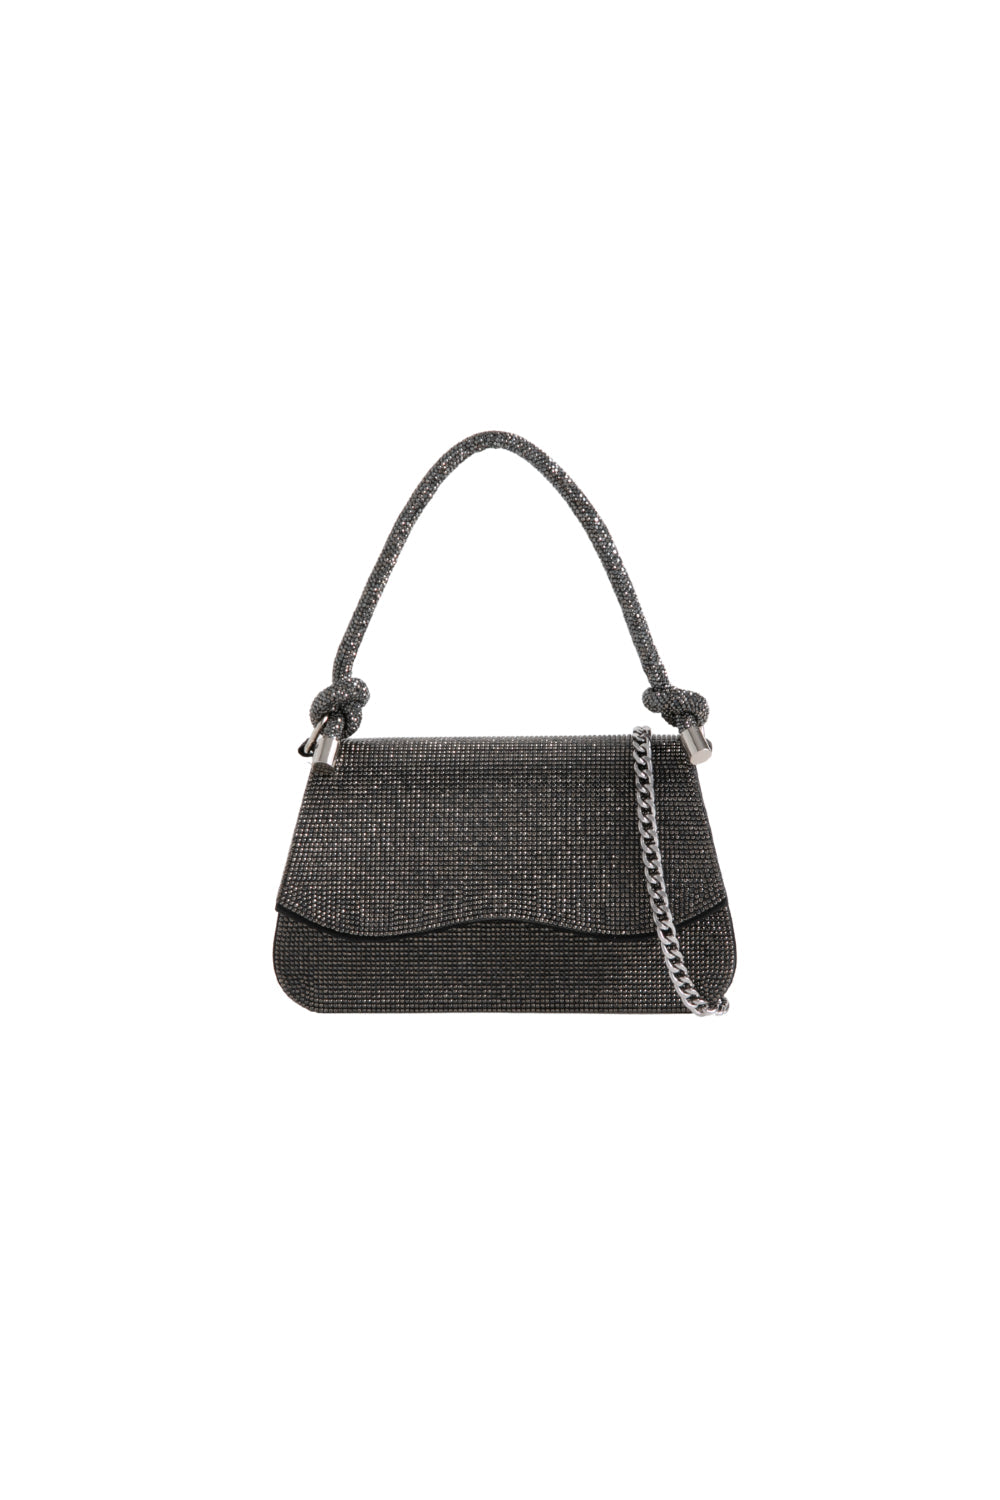 Black Diamante Top Handle Bag With Knot Details ALLD3220